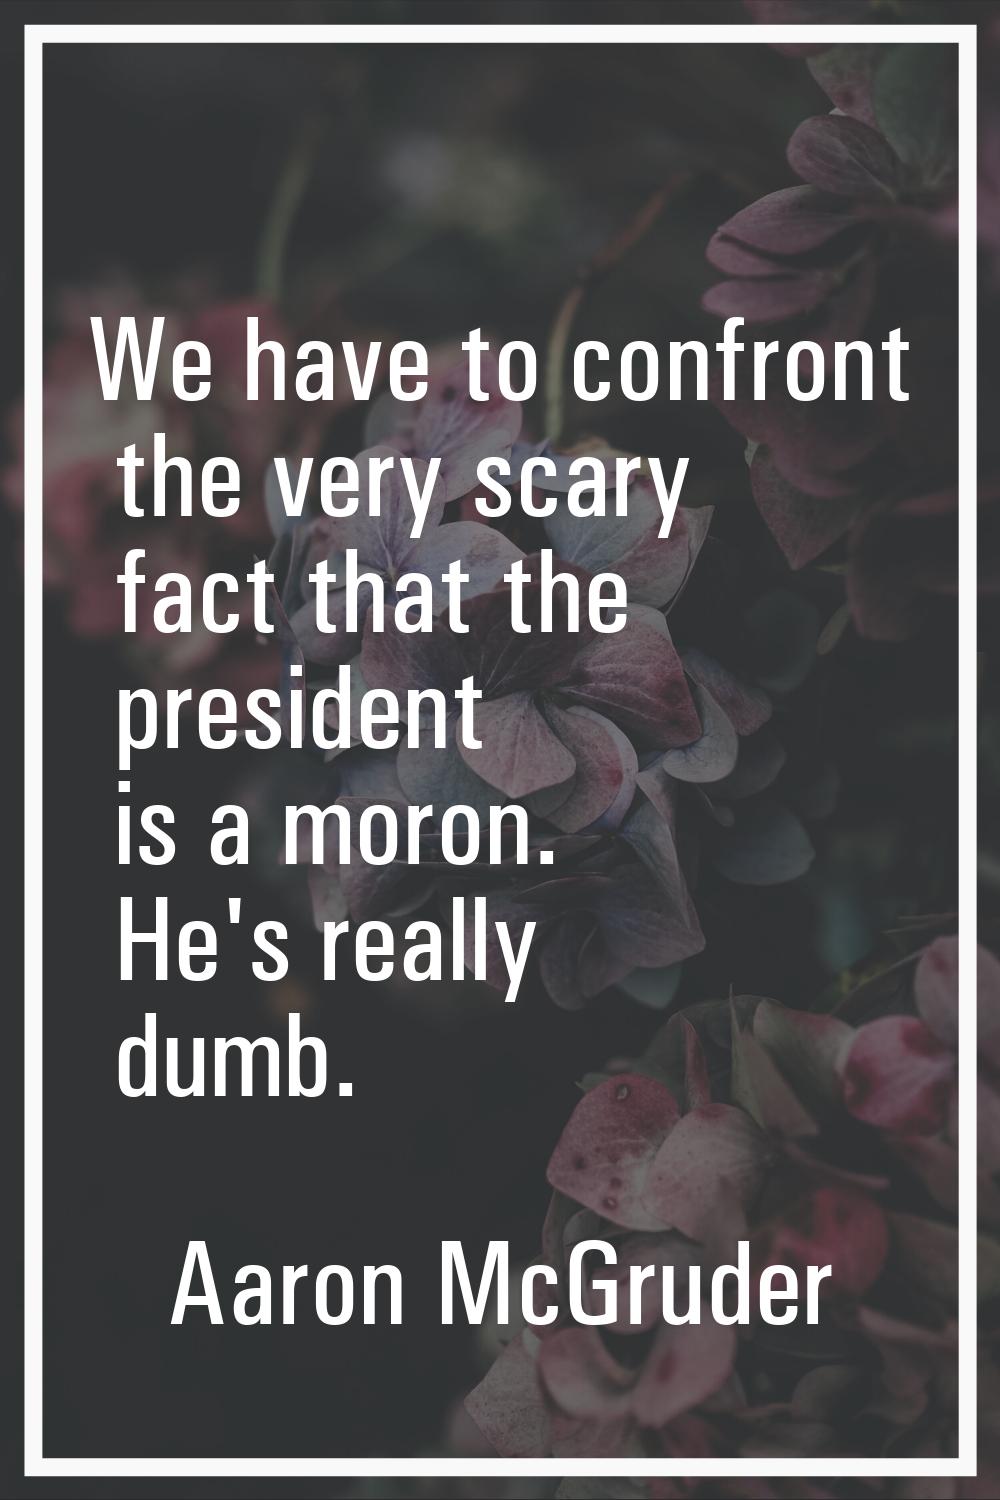 We have to confront the very scary fact that the president is a moron. He's really dumb.